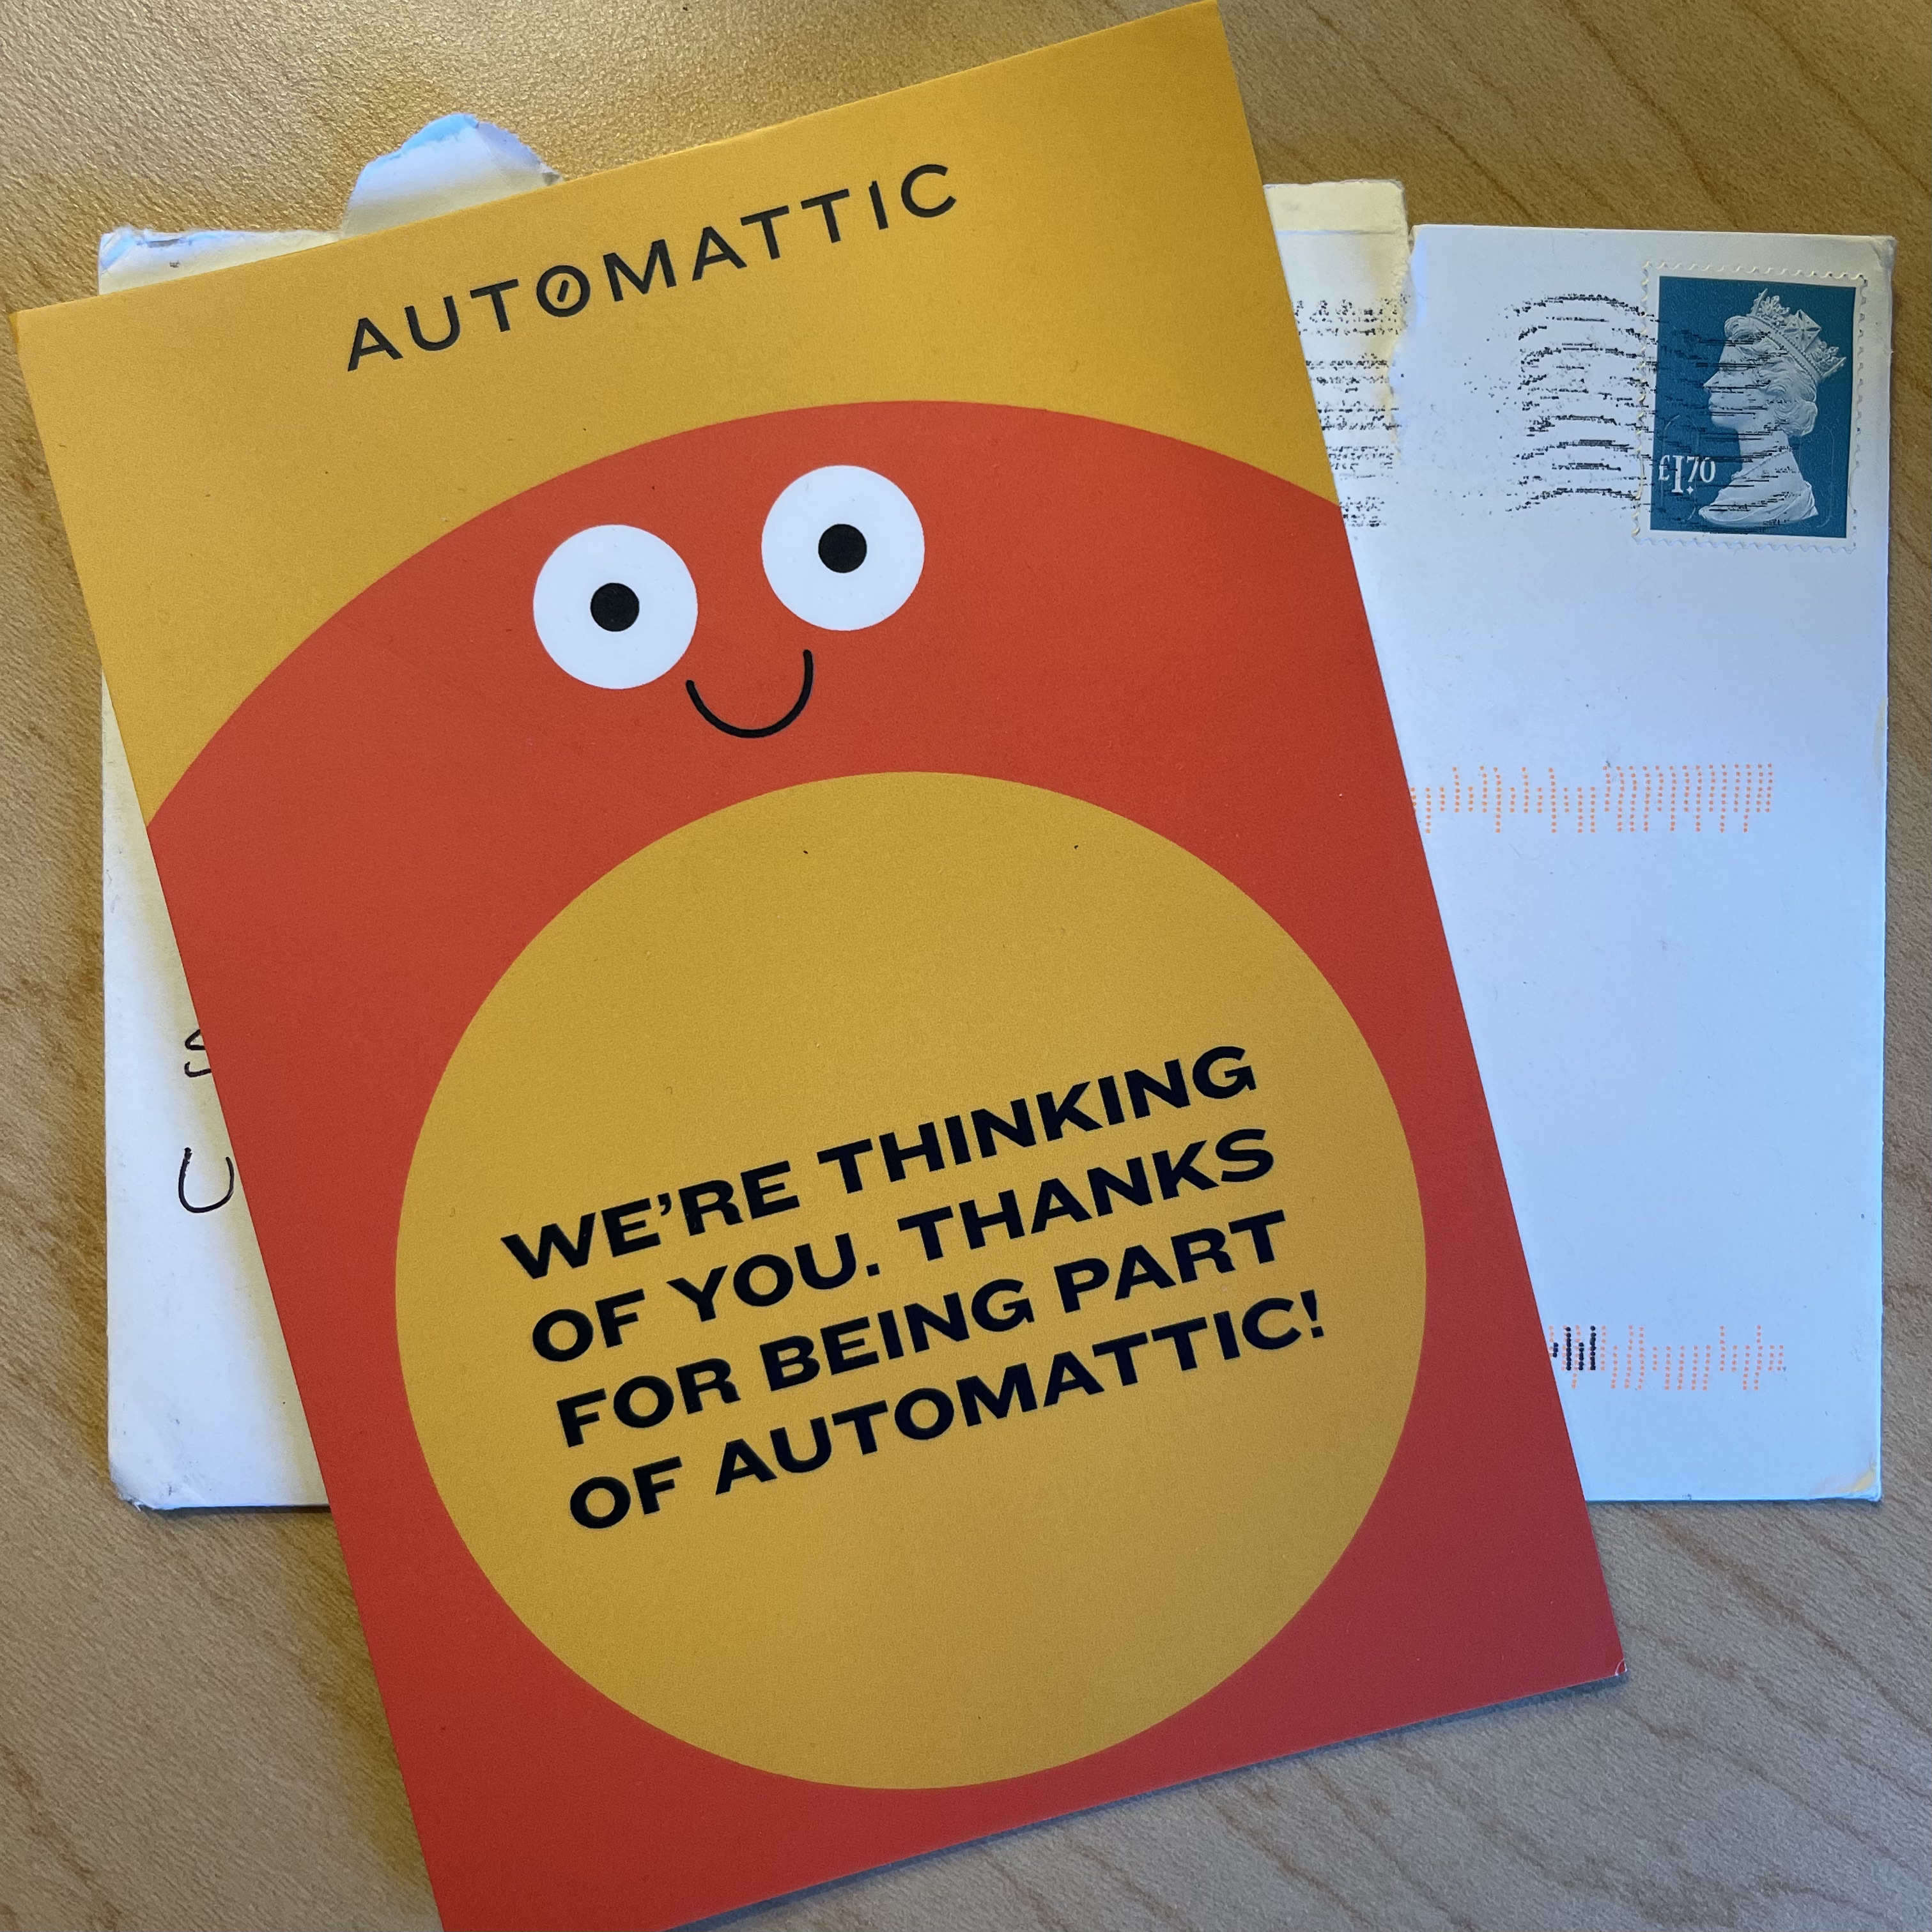 Photograph of a card and envelope I got with a canceled stamp. The card reads "We're thinking of you. Thanks for being a part of Automattic!". There's a smiley face on it as well.